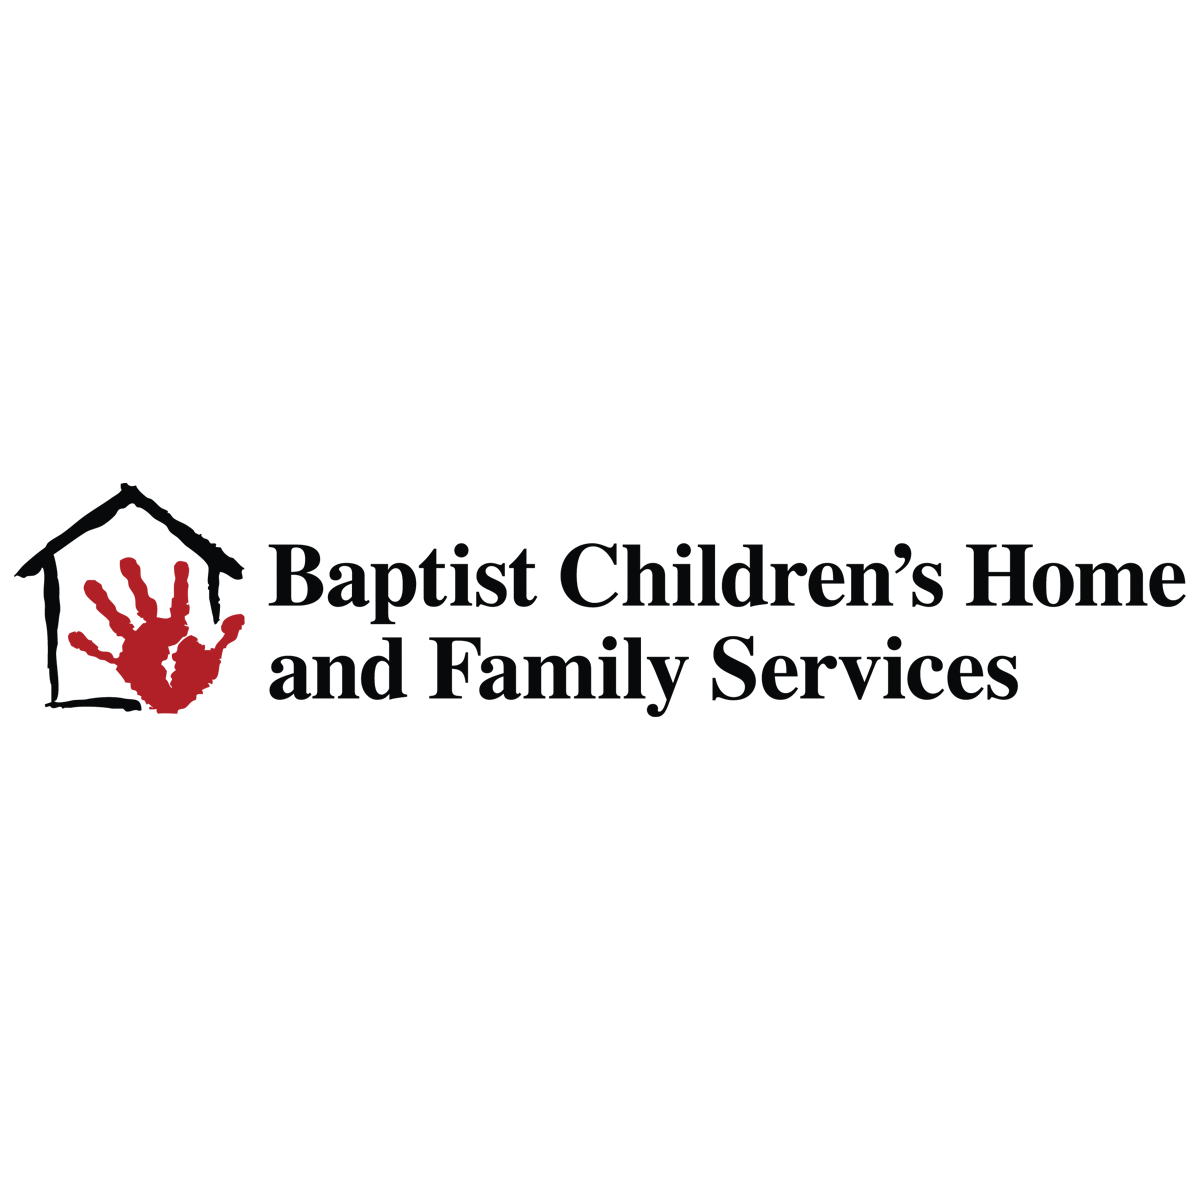 Baptist Children's Home and Family Services